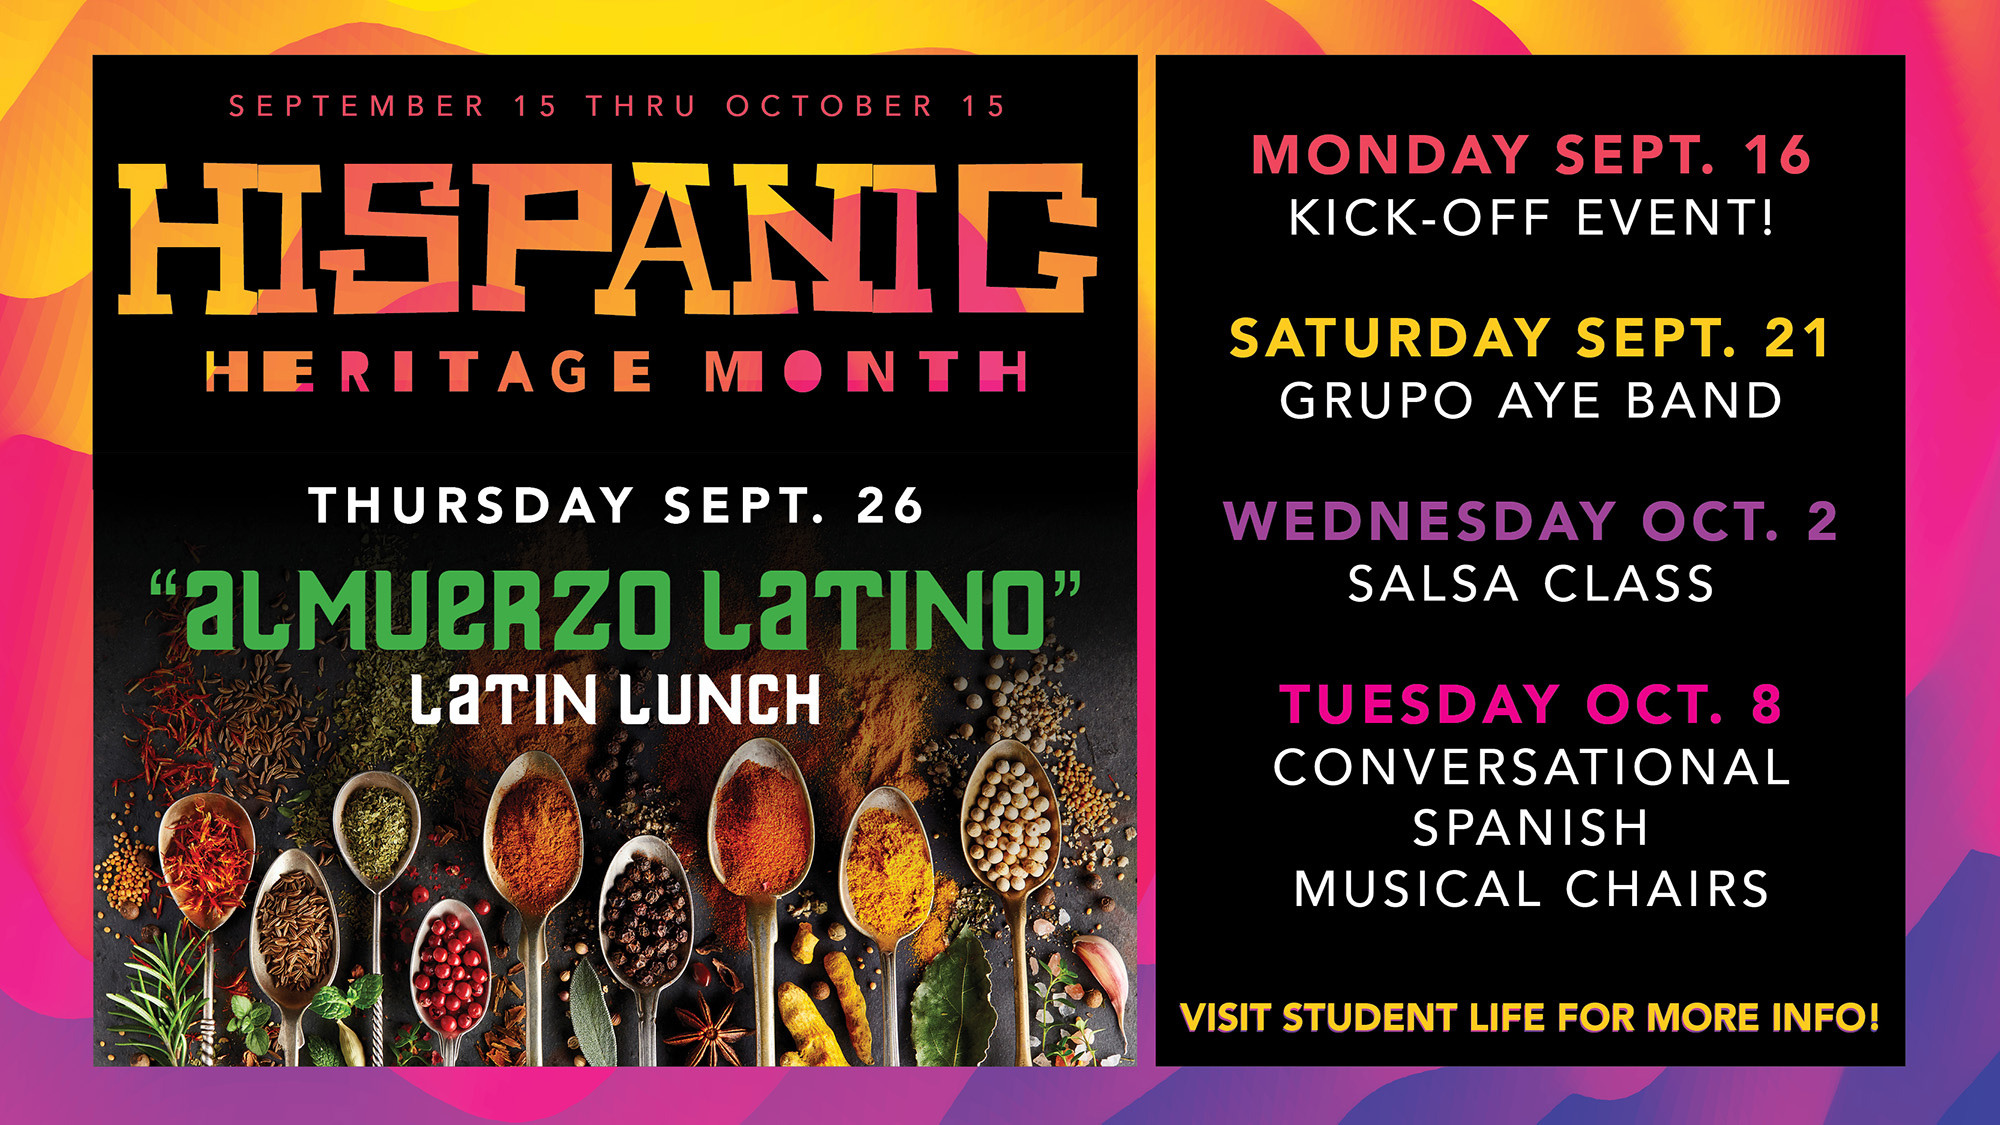 A text slide showing the schedule of Hispanic Heritage Month events at KCC.